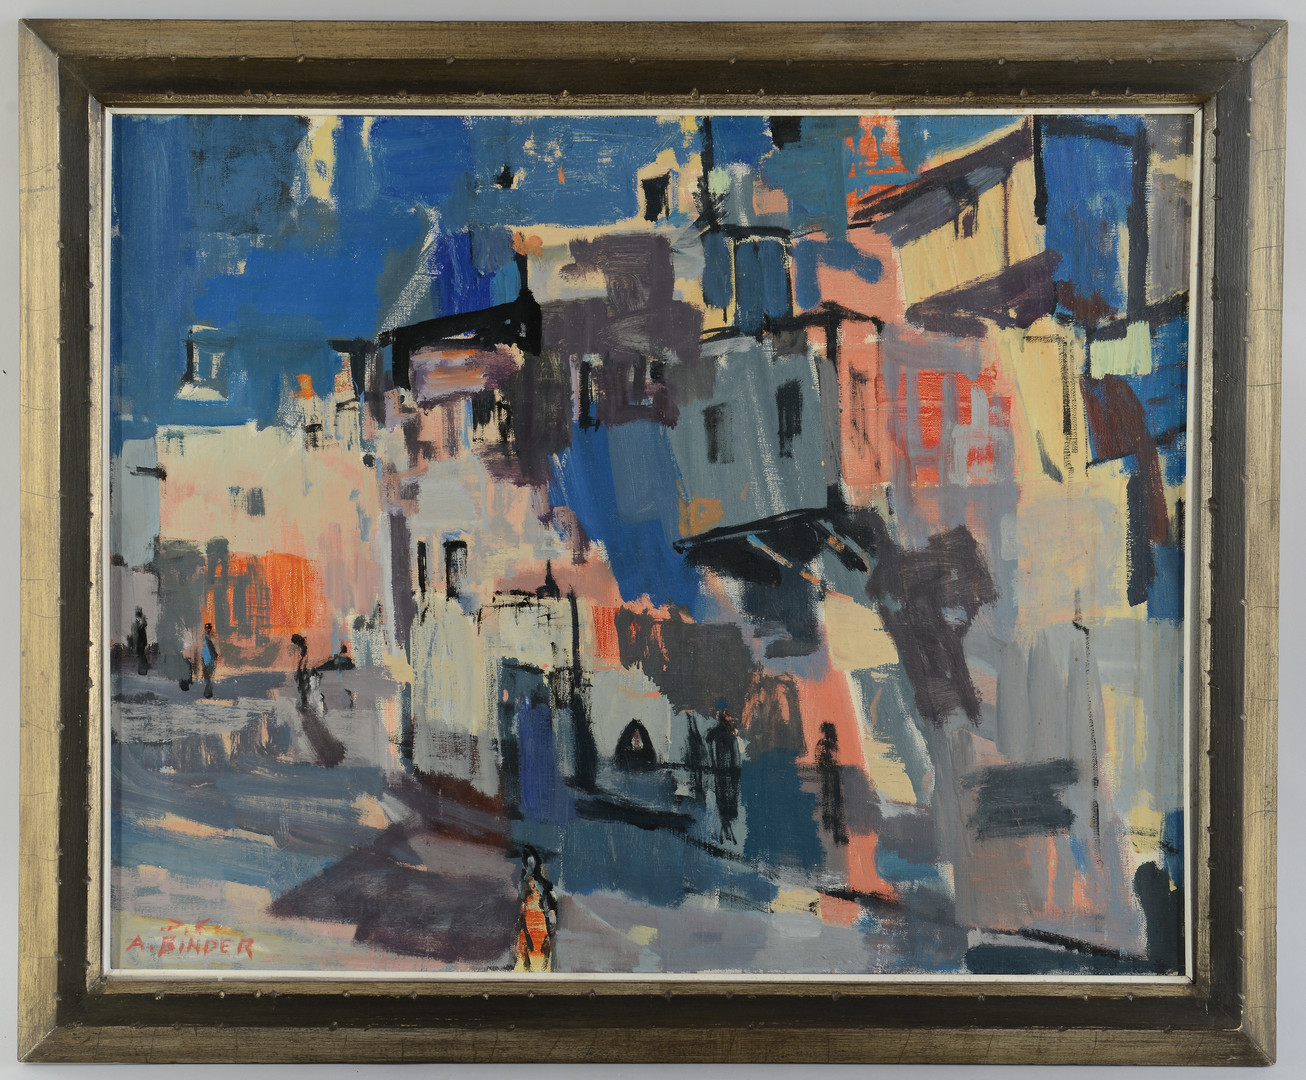 Lot 502: A. Binder oil on canvas